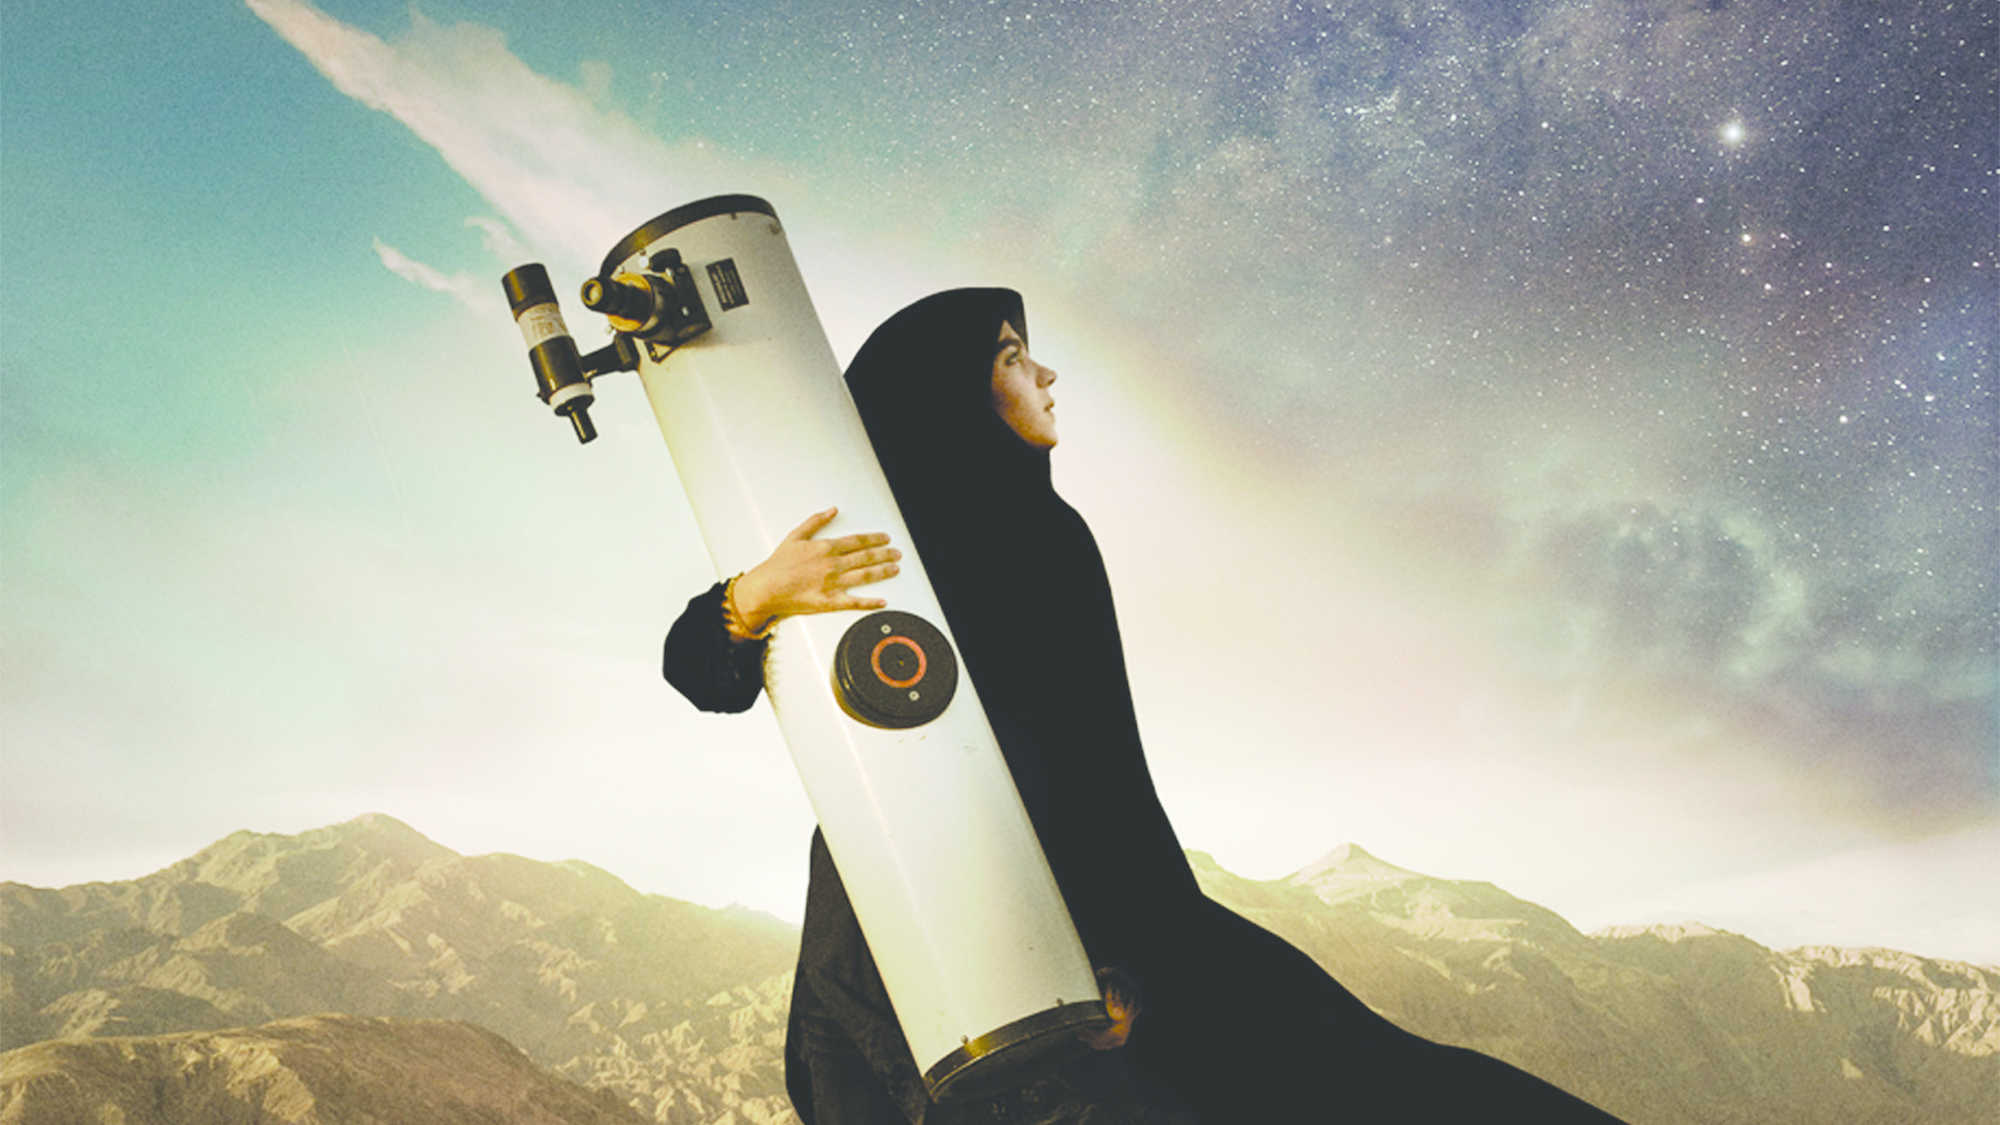 Sepideh - Reaching for the Stars (image 1)